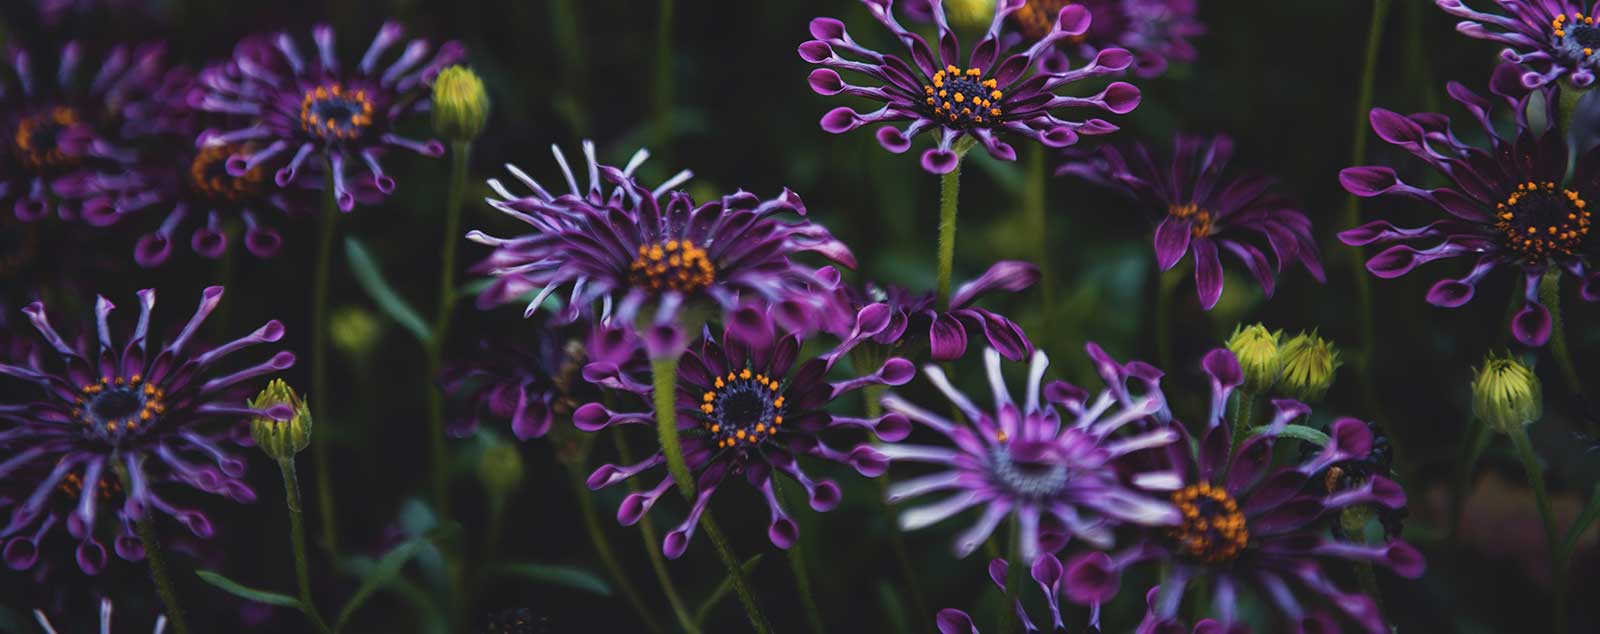 Spider Purple has dark purple flowers with an unusual petals shapd like spoons that profusely bloom from spring until fall, giving you long-lasting splashes of vibrant color in any garden.